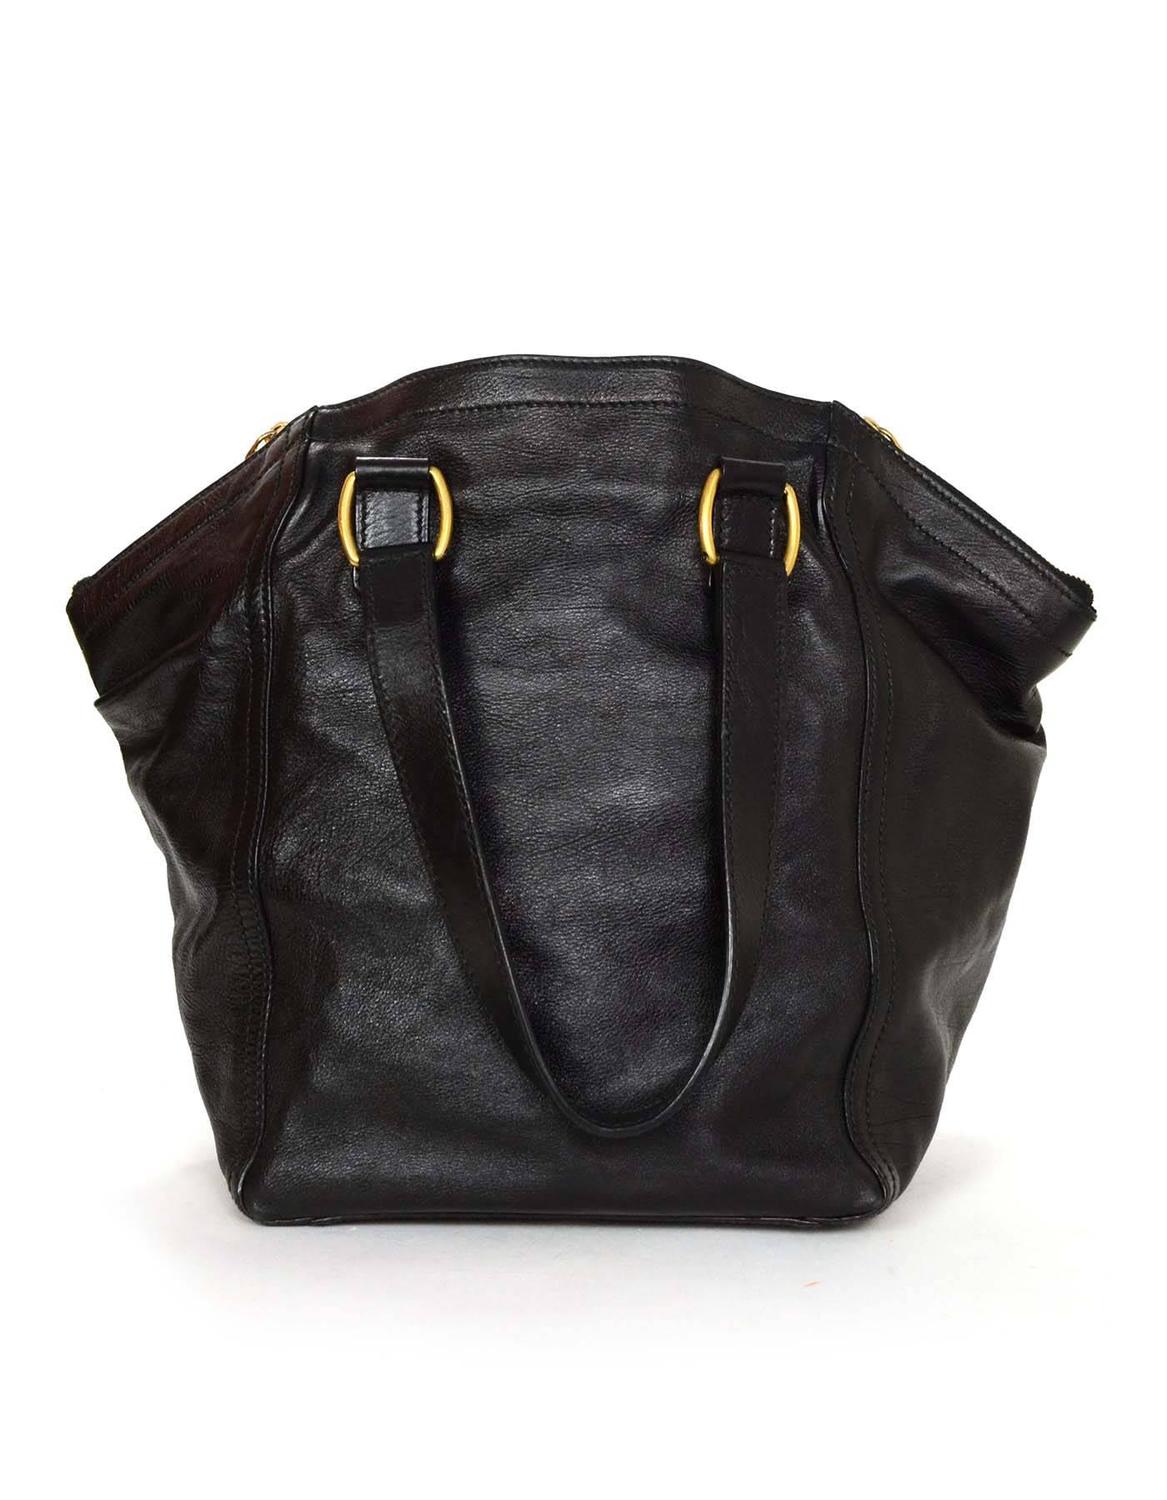 Yves Saint Laurent Black Leather Small Downtown Tote Bag For Sale at 1stdibs